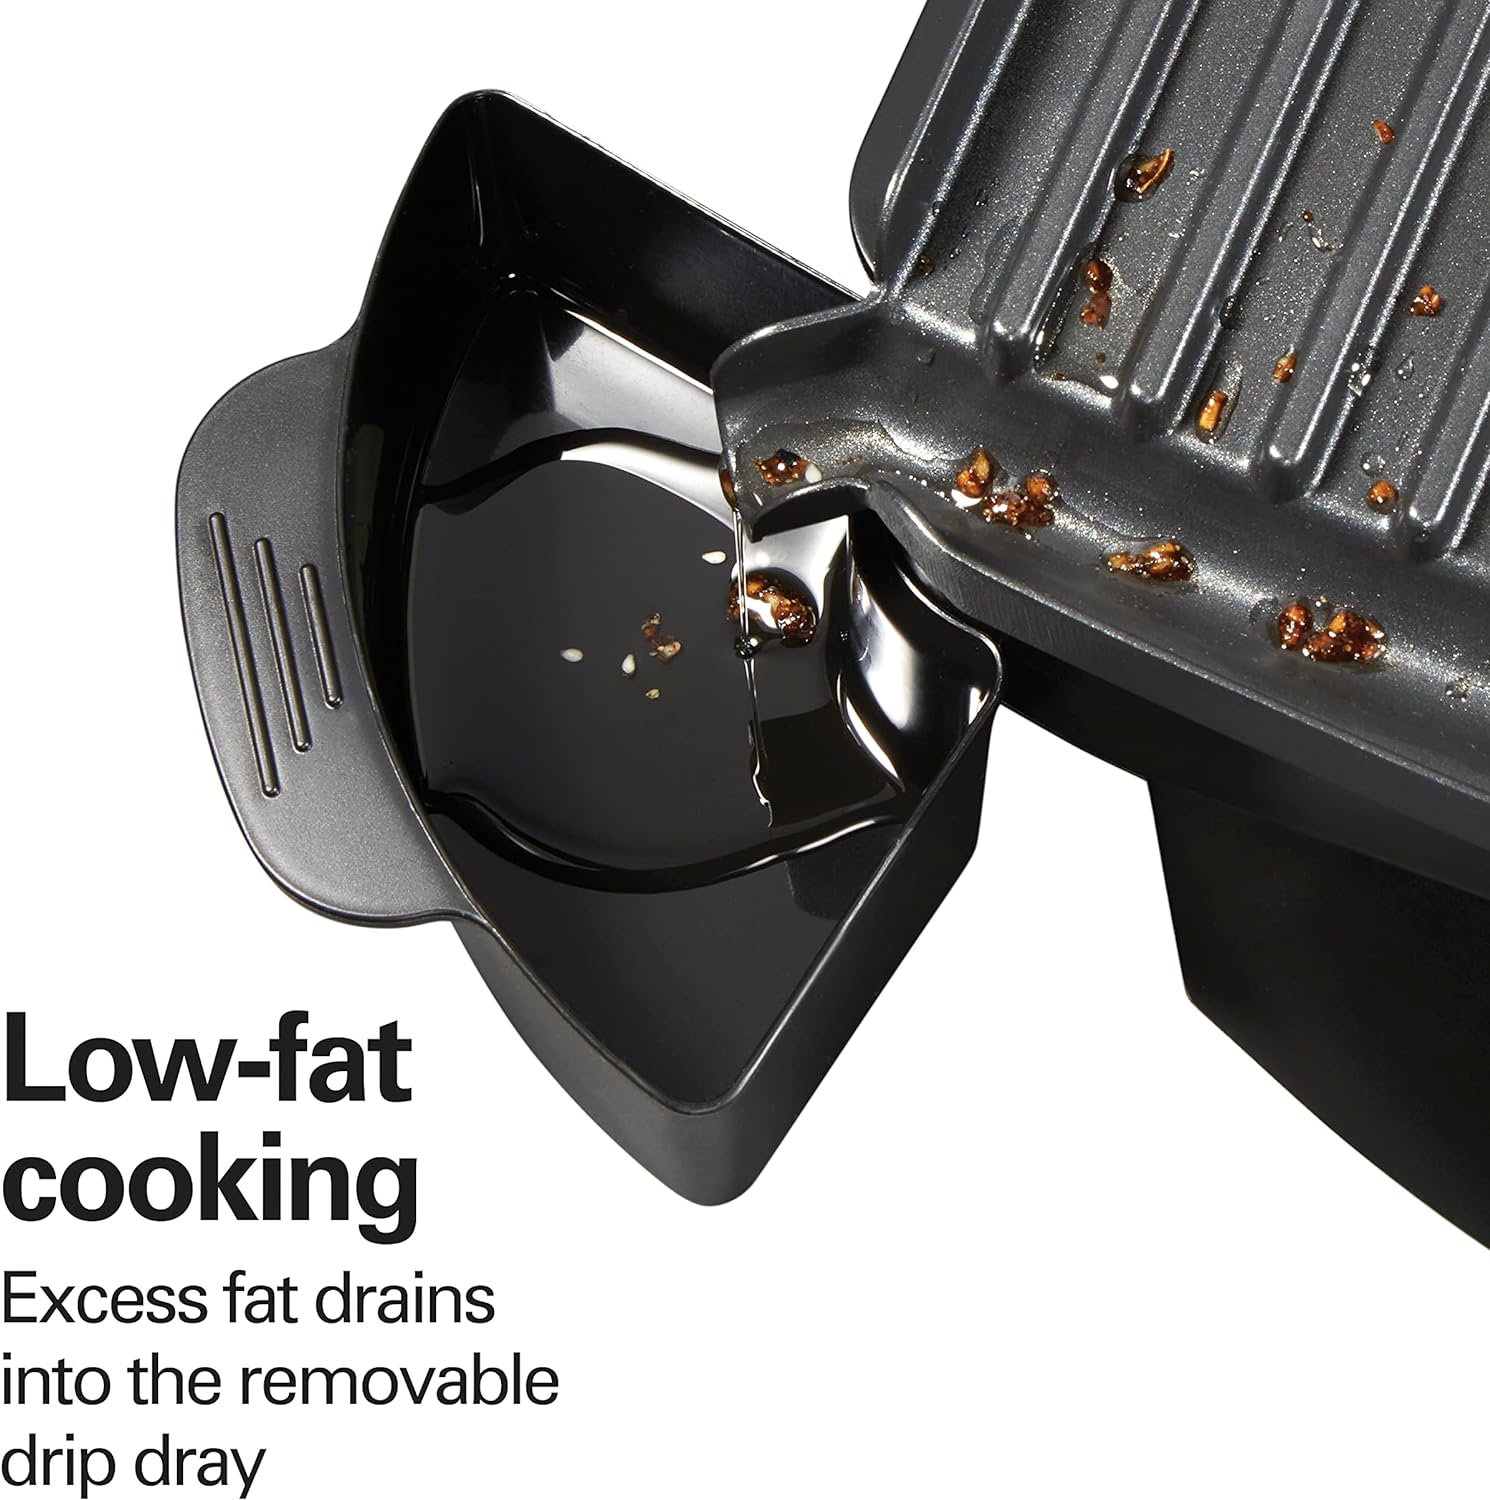 Hamilton Beach Steak Lovers Electric Indoor Searing Grill, Nonstick 100 Square, Stainless Steel (25331), Black and Stainless, Medium